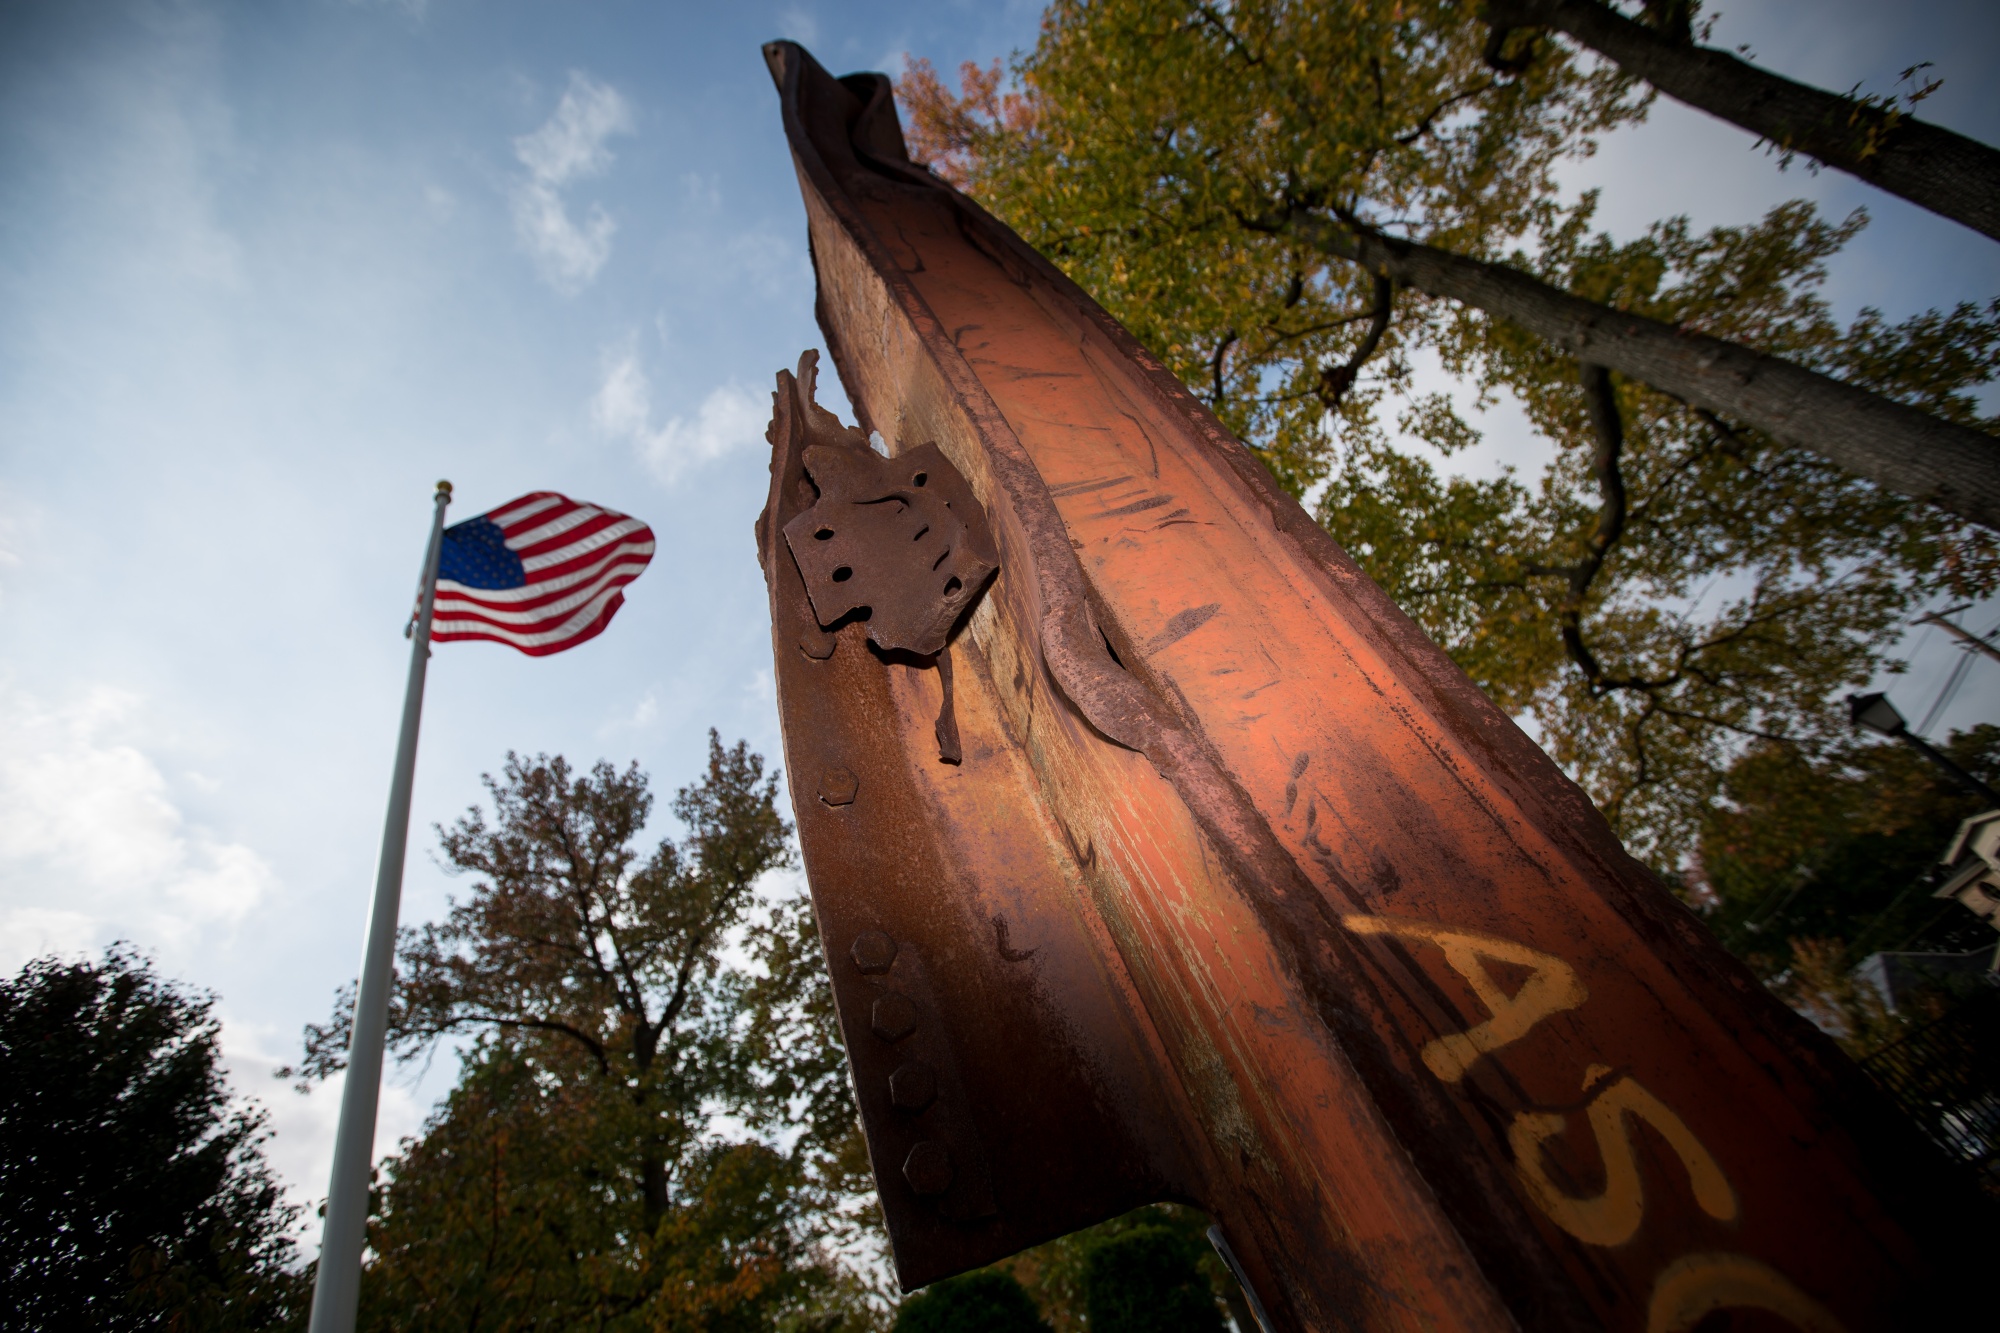 An American flag flies behind steel from the World Trade Center at Constitution Park in Fort Lee, New Jersey —&nbsp;one of many local memorials to the Sept. 11 attacks across the U.S.&nbsp;